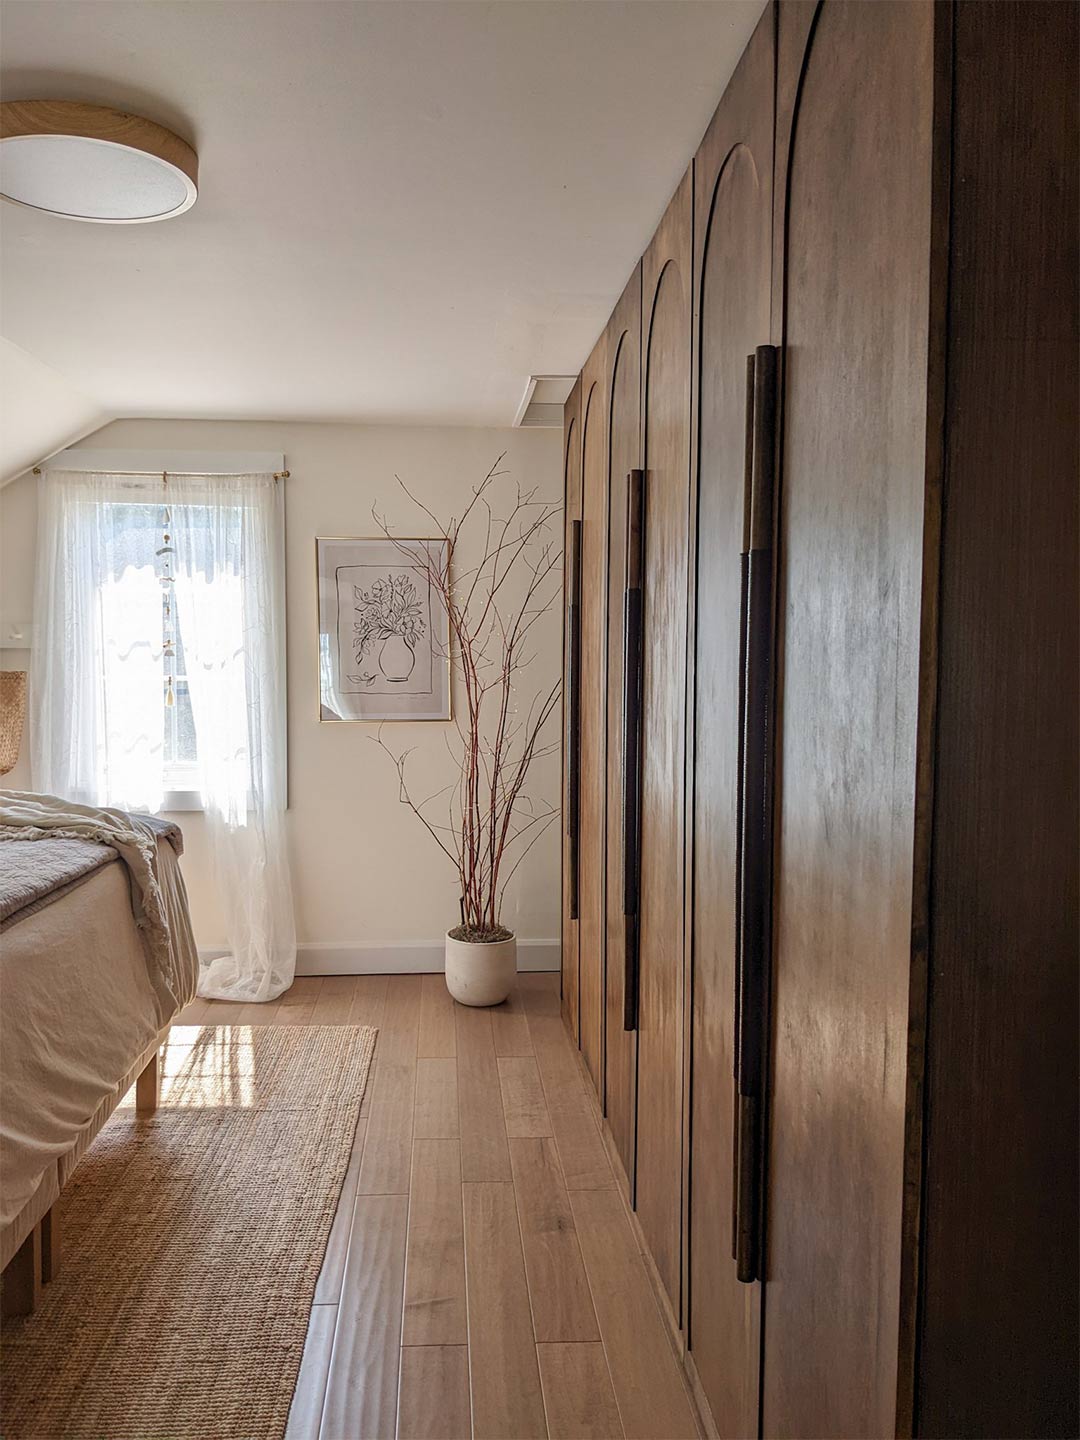 An example of a minimalist wood wardrobe in a soft quiet luxury bedroom design